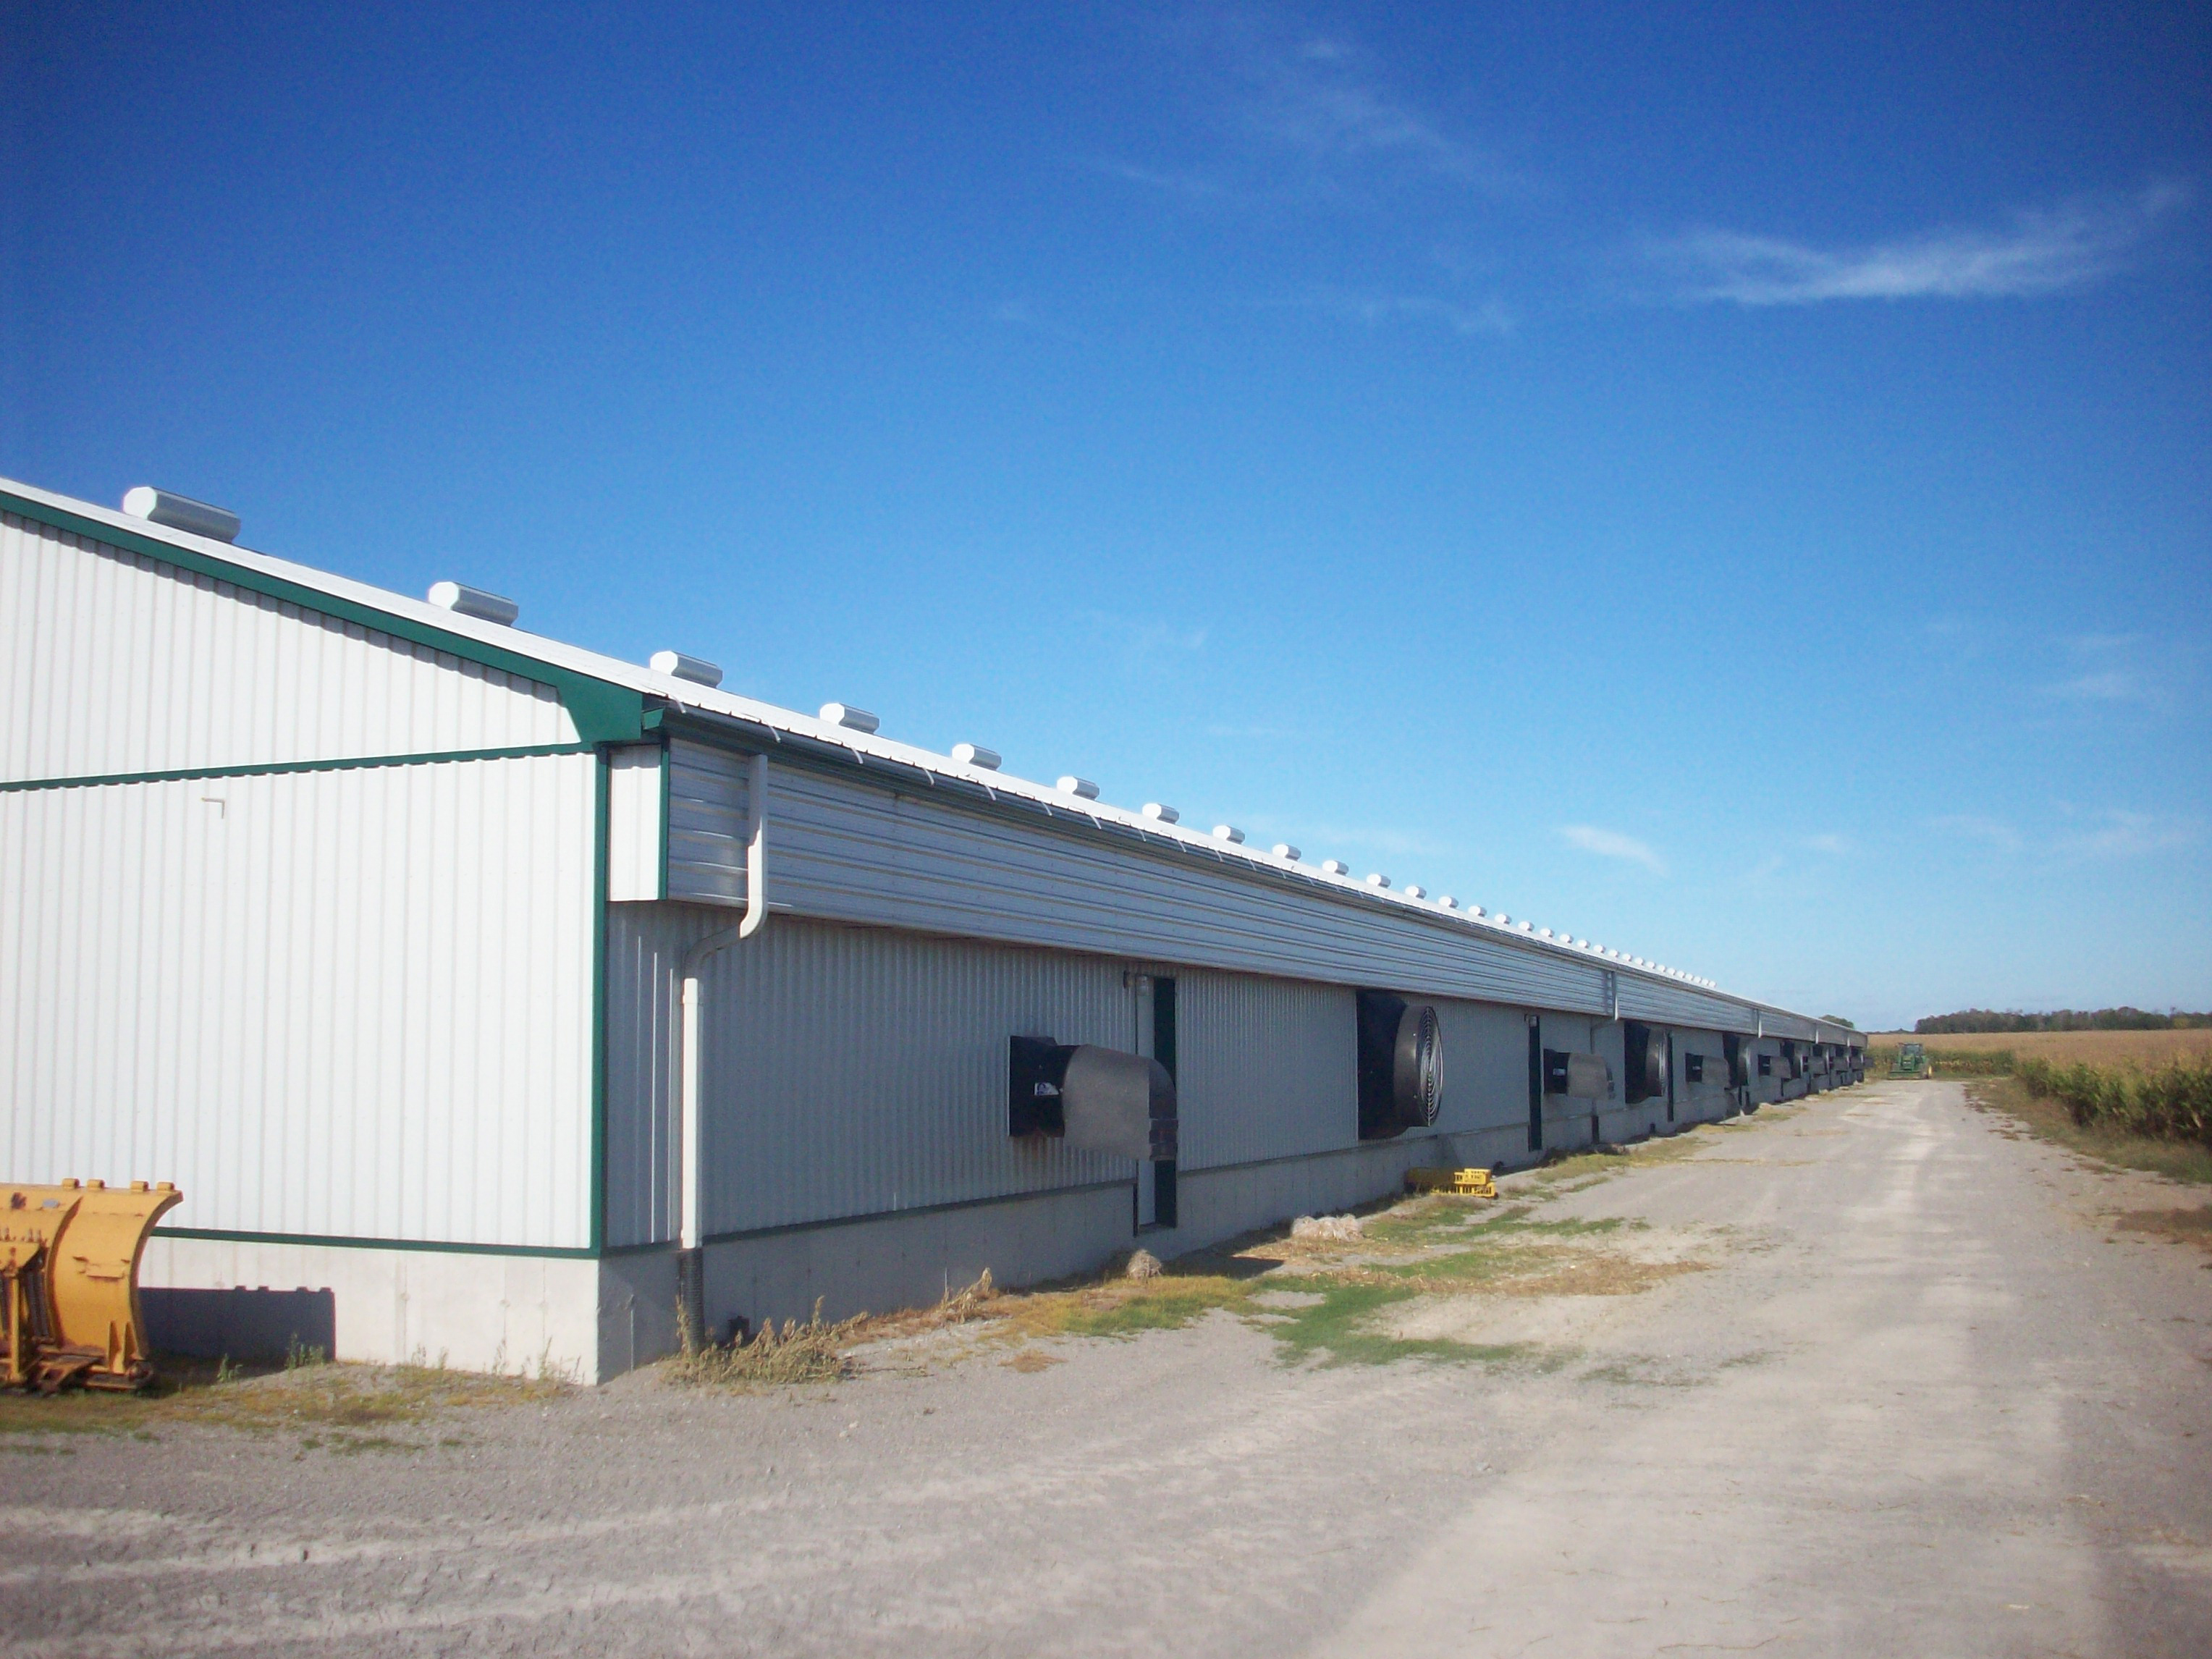 Longitudinal view of a 500-foot long poultry barn